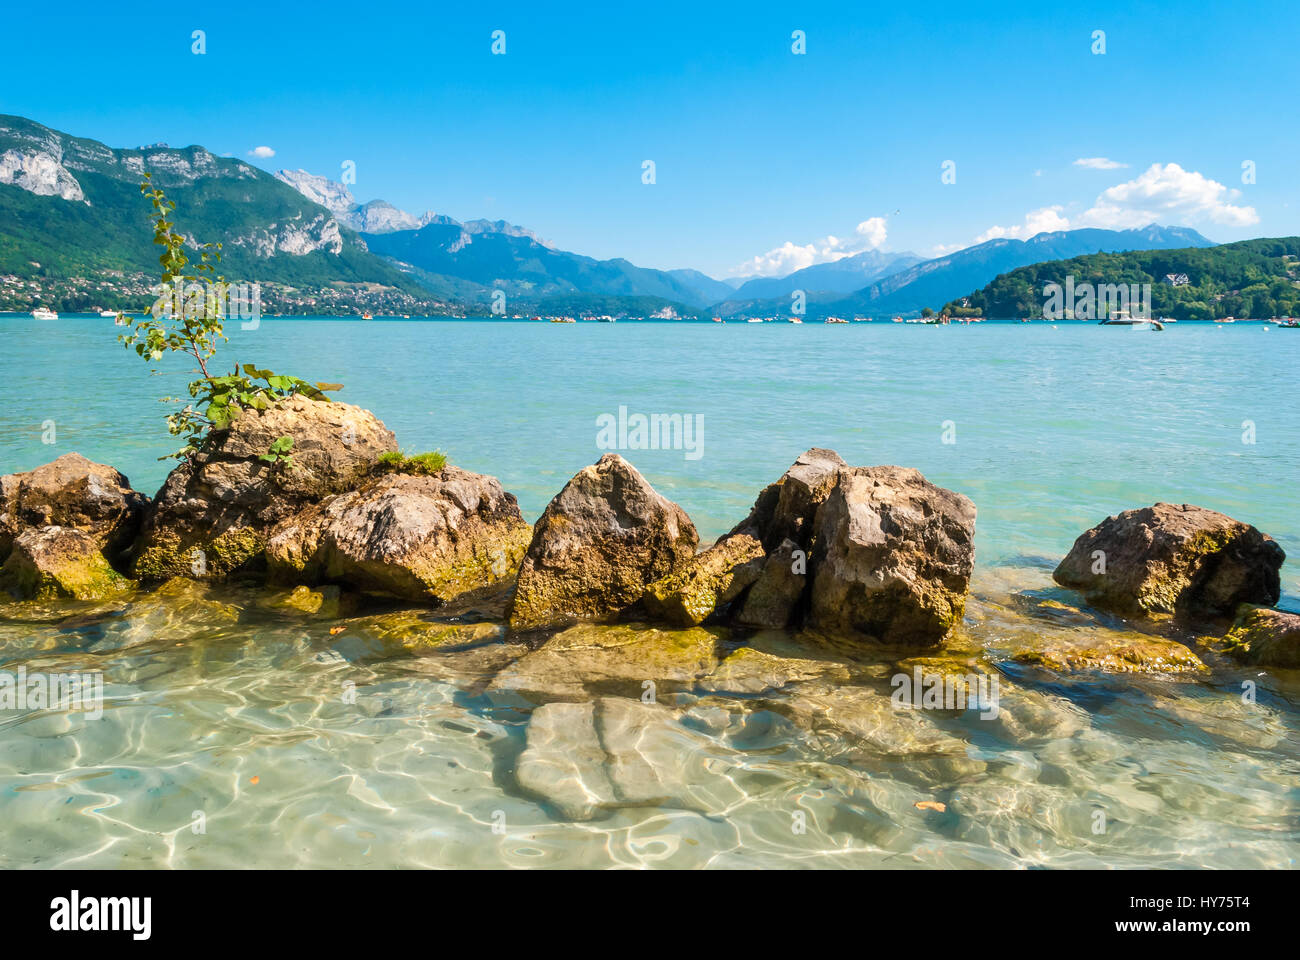 Annecy lake and landscape Stock Photo